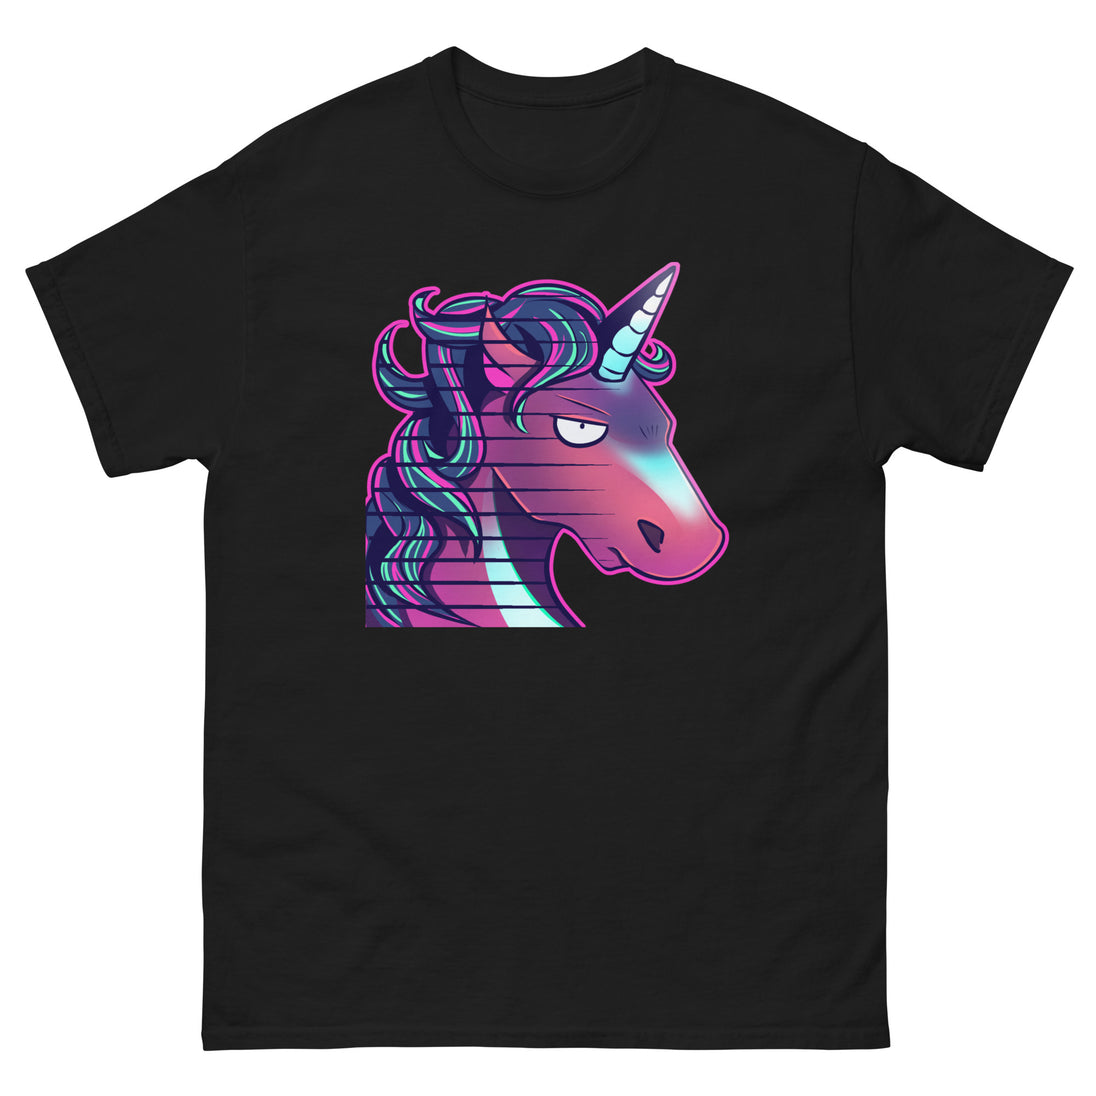 Unicorn Mad Gamer/Streamer T-Shirt - 100% Soft Cotton, Made in the USA